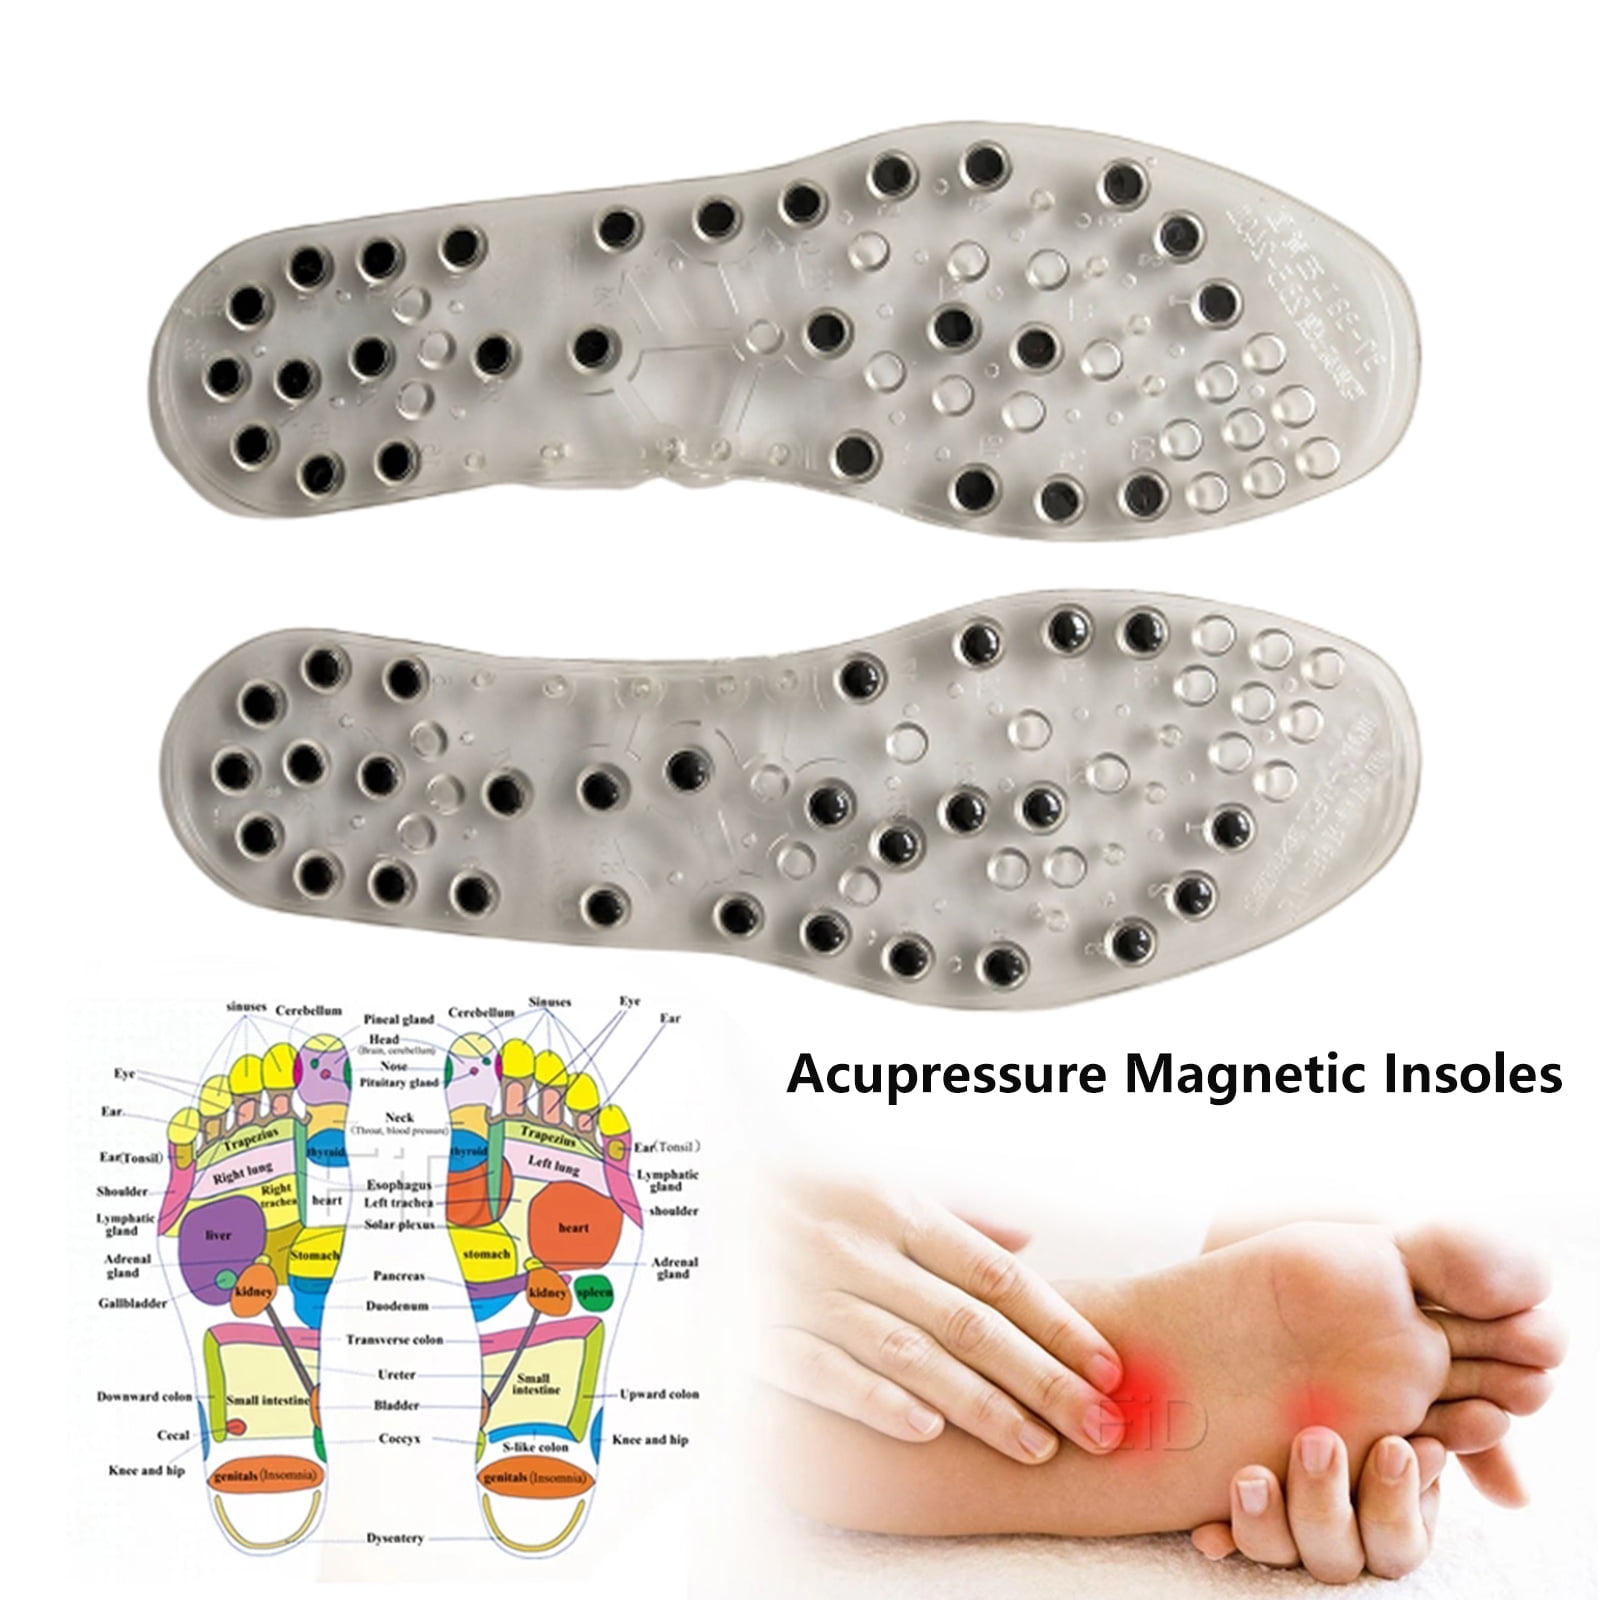 Acupressure Massage Insoles Foot Magnet Therapy Reflexology Pain Relief Shoe Pad 